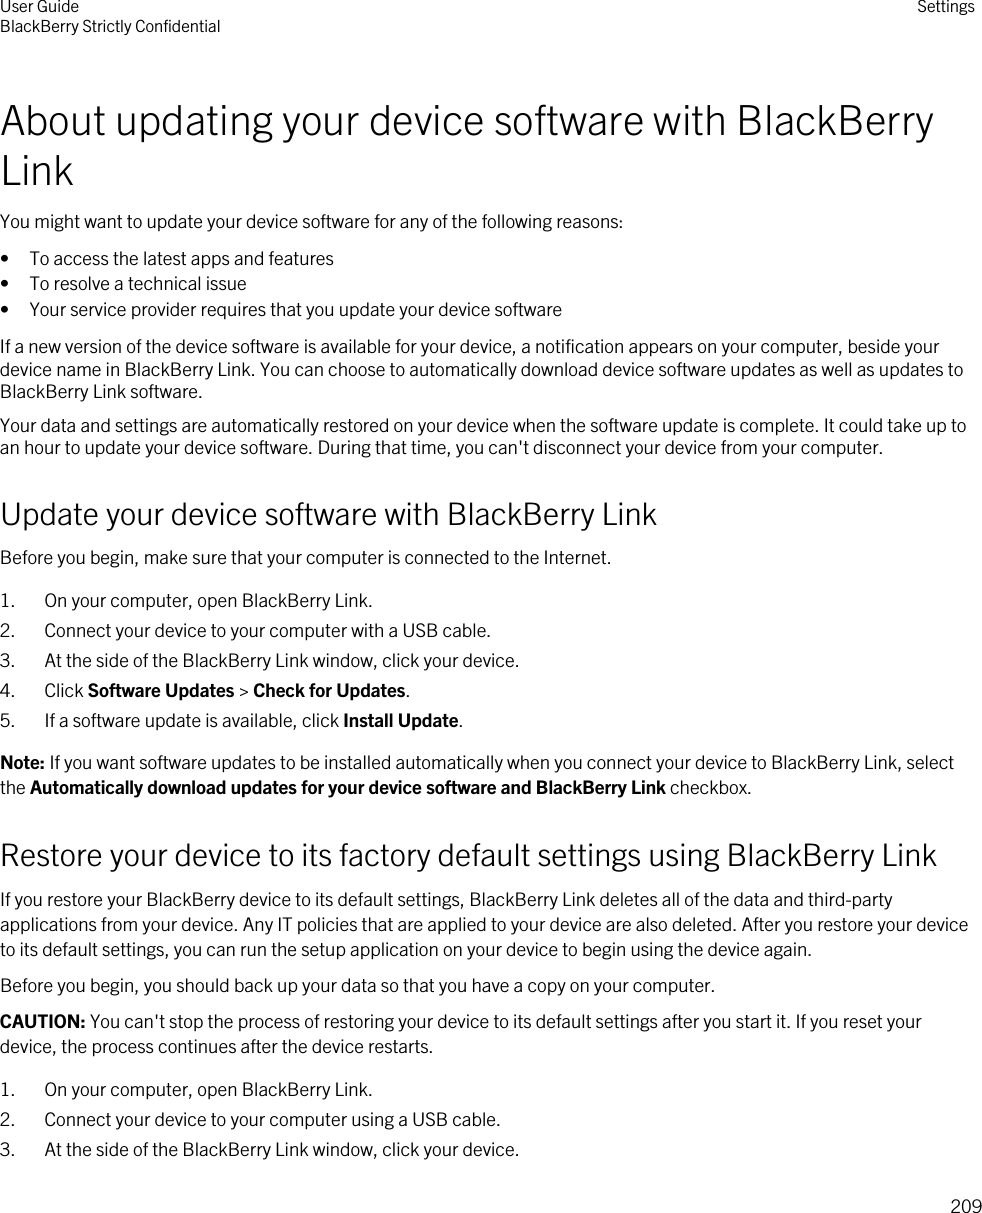 About updating your device software with BlackBerry LinkYou might want to update your device software for any of the following reasons:• To access the latest apps and features• To resolve a technical issue• Your service provider requires that you update your device softwareIf a new version of the device software is available for your device, a notification appears on your computer, beside your device name in BlackBerry Link. You can choose to automatically download device software updates as well as updates to BlackBerry Link software.Your data and settings are automatically restored on your device when the software update is complete. It could take up to an hour to update your device software. During that time, you can&apos;t disconnect your device from your computer.Update your device software with BlackBerry LinkBefore you begin, make sure that your computer is connected to the Internet.1. On your computer, open BlackBerry Link.2. Connect your device to your computer with a USB cable.3. At the side of the BlackBerry Link window, click your device.4. Click Software Updates &gt; Check for Updates.5. If a software update is available, click Install Update.Note: If you want software updates to be installed automatically when you connect your device to BlackBerry Link, select the Automatically download updates for your device software and BlackBerry Link checkbox.Restore your device to its factory default settings using BlackBerry LinkIf you restore your BlackBerry device to its default settings, BlackBerry Link deletes all of the data and third-party applications from your device. Any IT policies that are applied to your device are also deleted. After you restore your device to its default settings, you can run the setup application on your device to begin using the device again.Before you begin, you should back up your data so that you have a copy on your computer.CAUTION: You can&apos;t stop the process of restoring your device to its default settings after you start it. If you reset your device, the process continues after the device restarts.1. On your computer, open BlackBerry Link.2. Connect your device to your computer using a USB cable.3. At the side of the BlackBerry Link window, click your device.User GuideBlackBerry Strictly Confidential Settings209